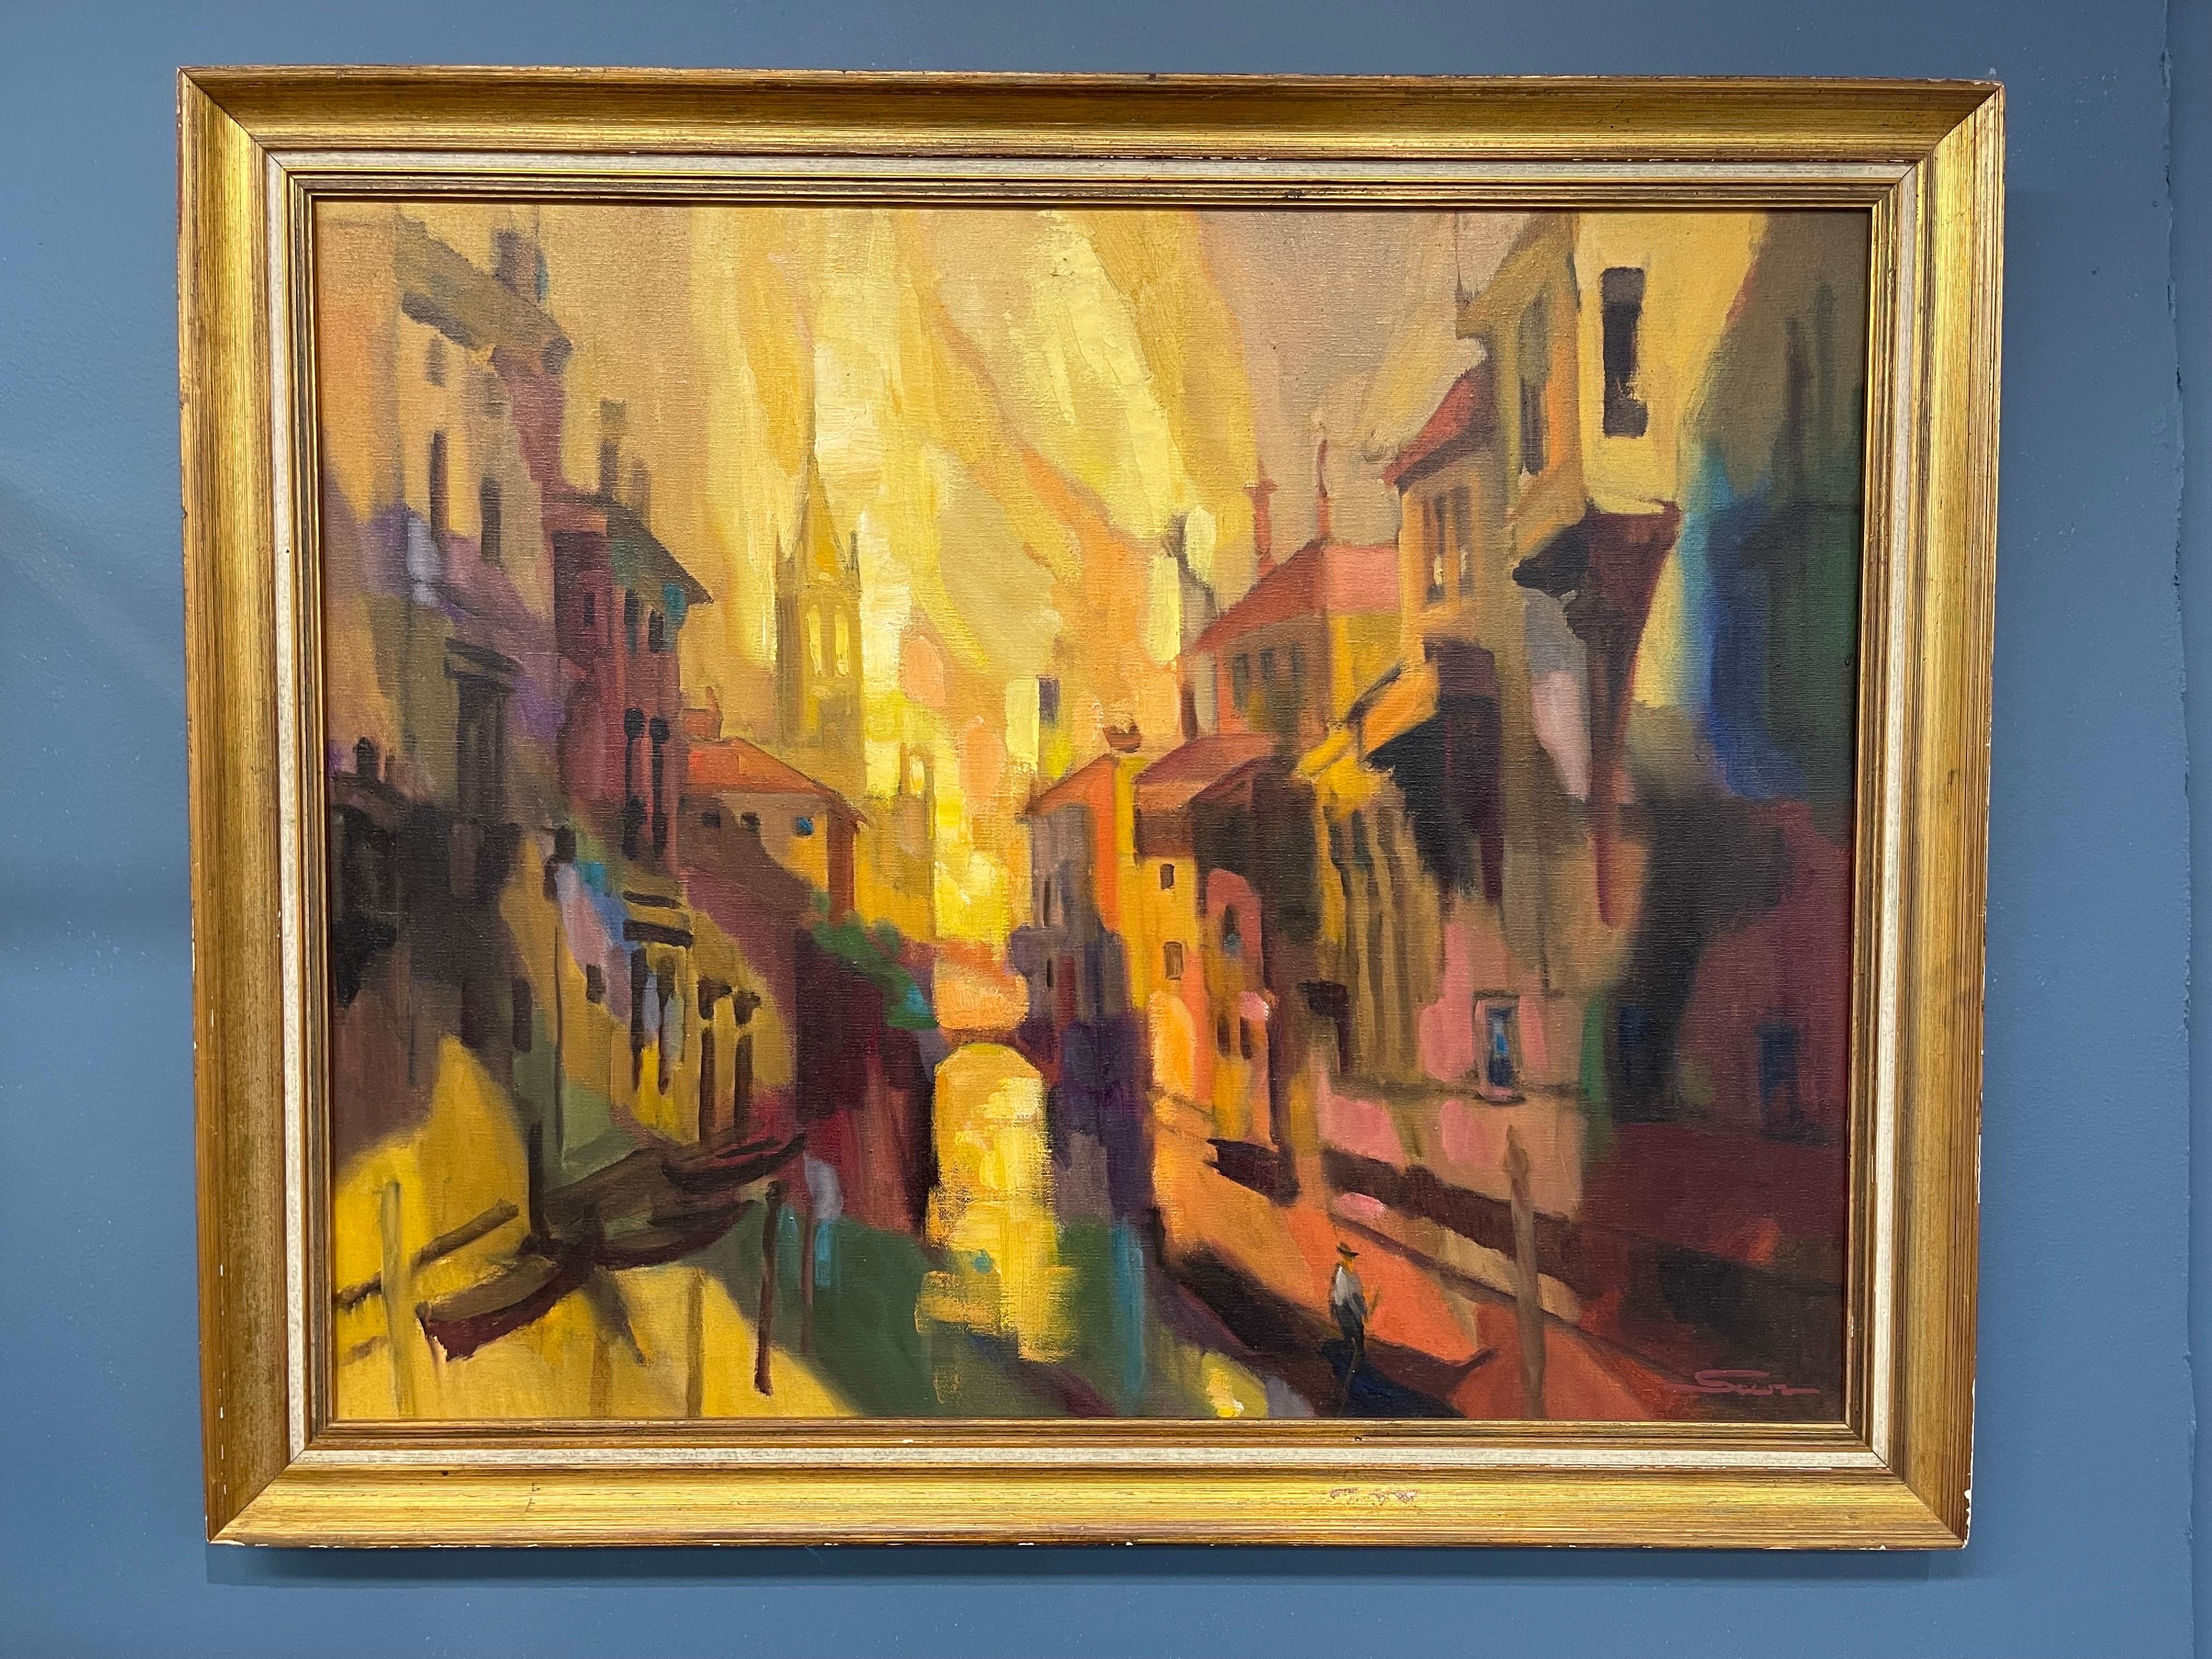 Iconic Mid-Century Modern abstract painting, signed by the artist at bottom right. Looks to be a cityscape them, perhaps of an Italian town/city. No provenance.
Great colors and scale. Medium is oil on canvas.